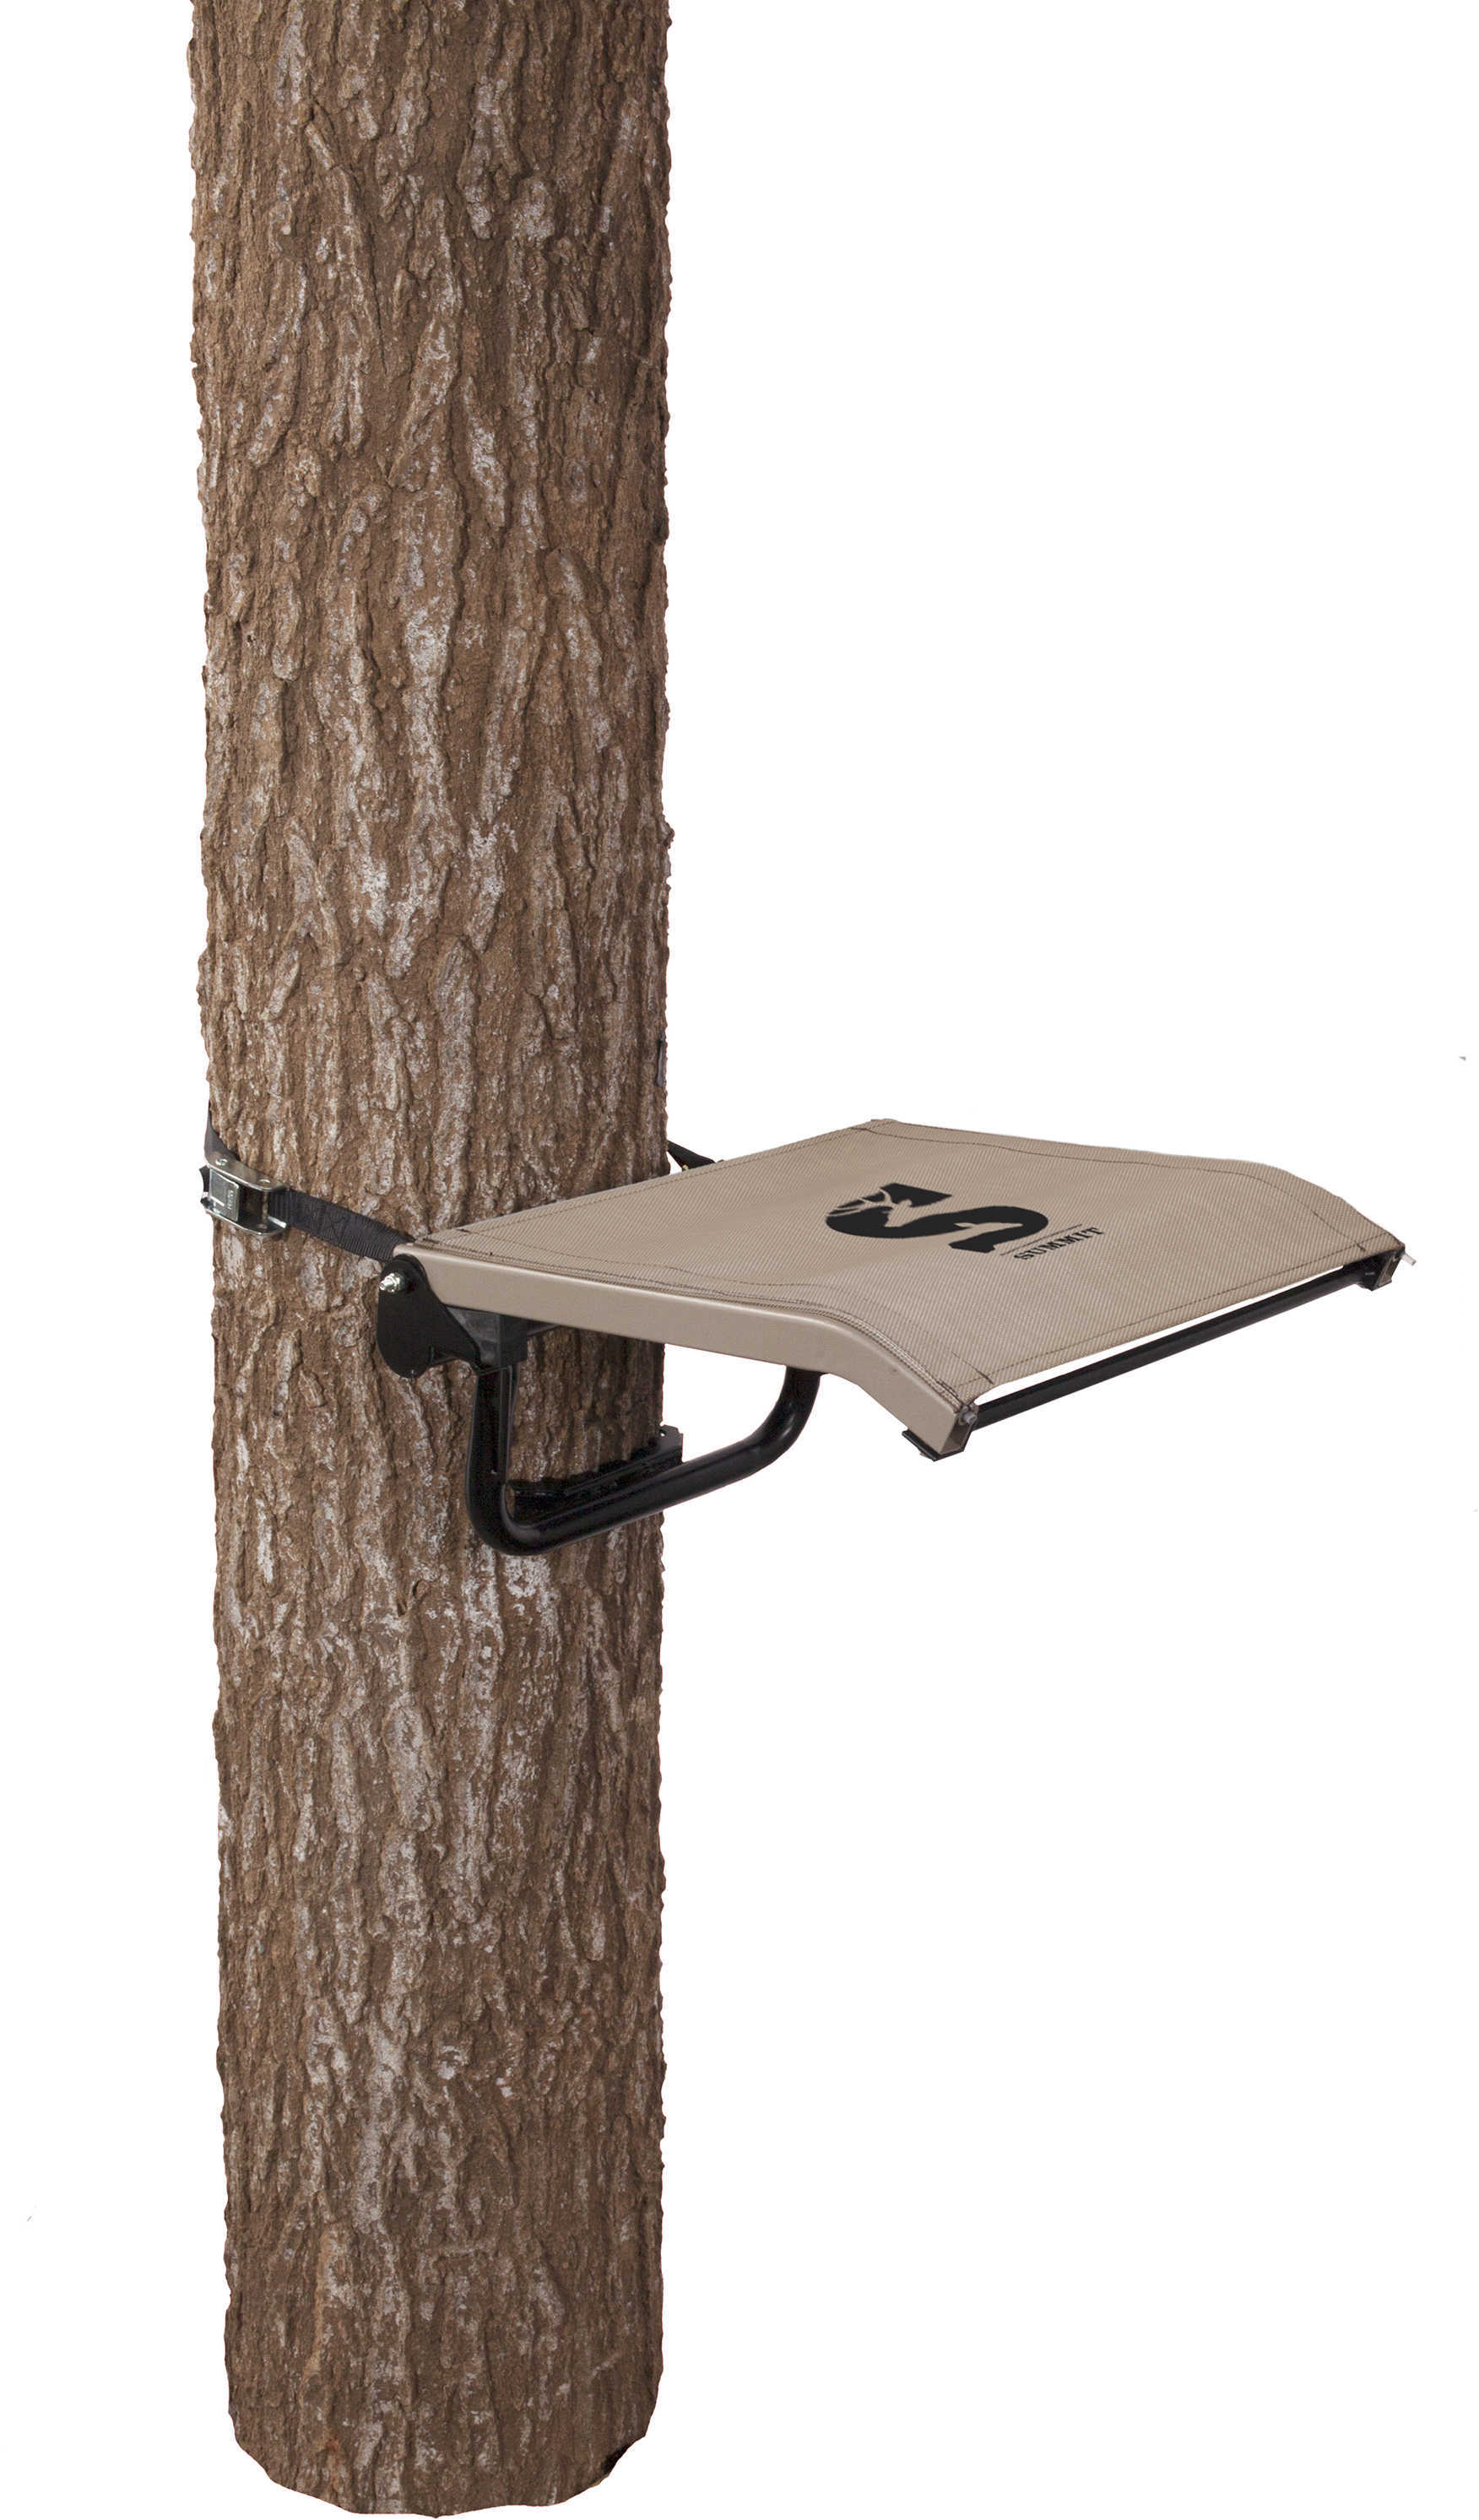 Summit Treestands Hang On Stand The Stump Md: SU82089